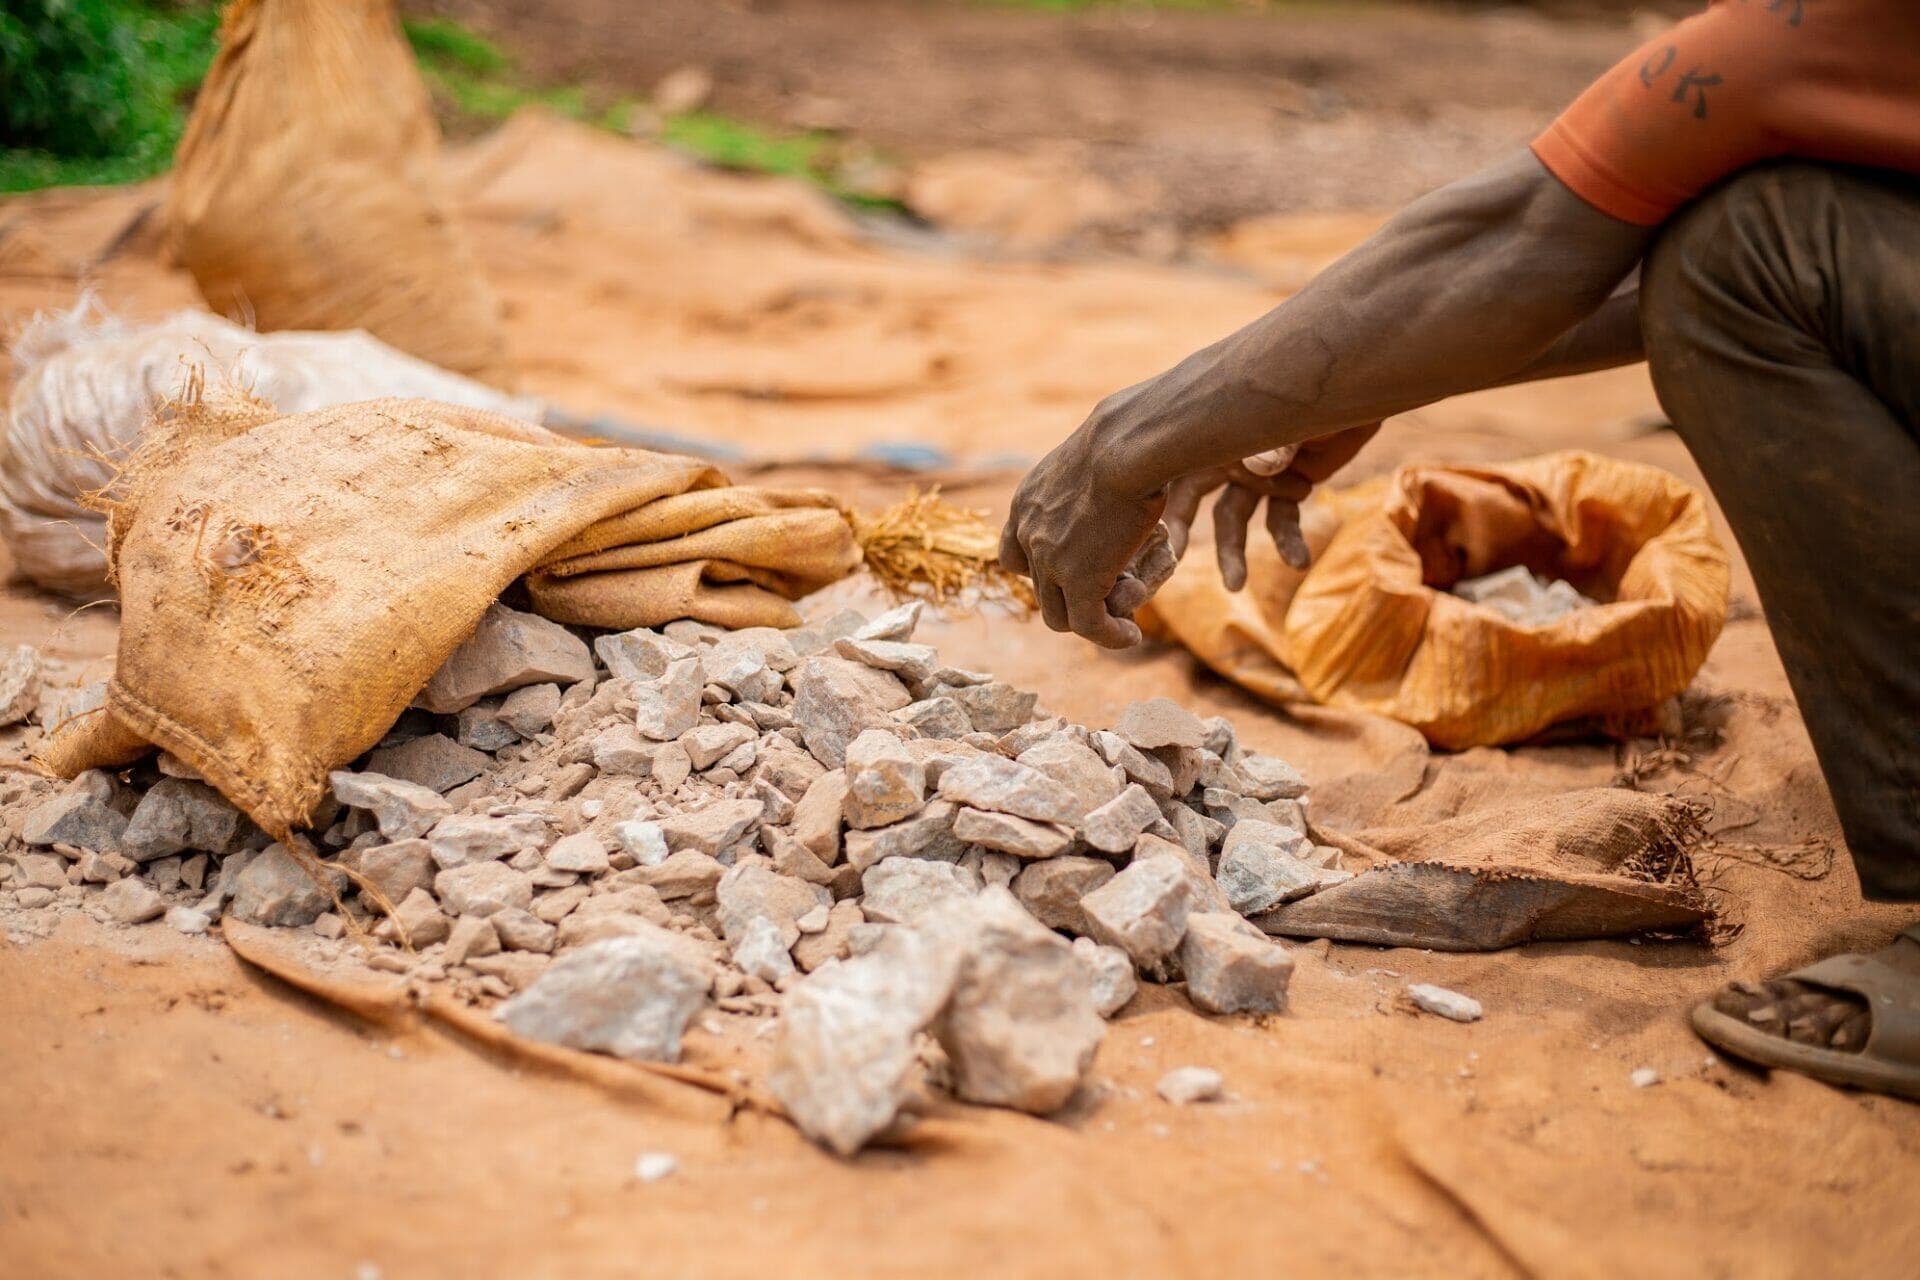 Gold Mutual Funds: Investing in Responsible Artisanal Gold Mining